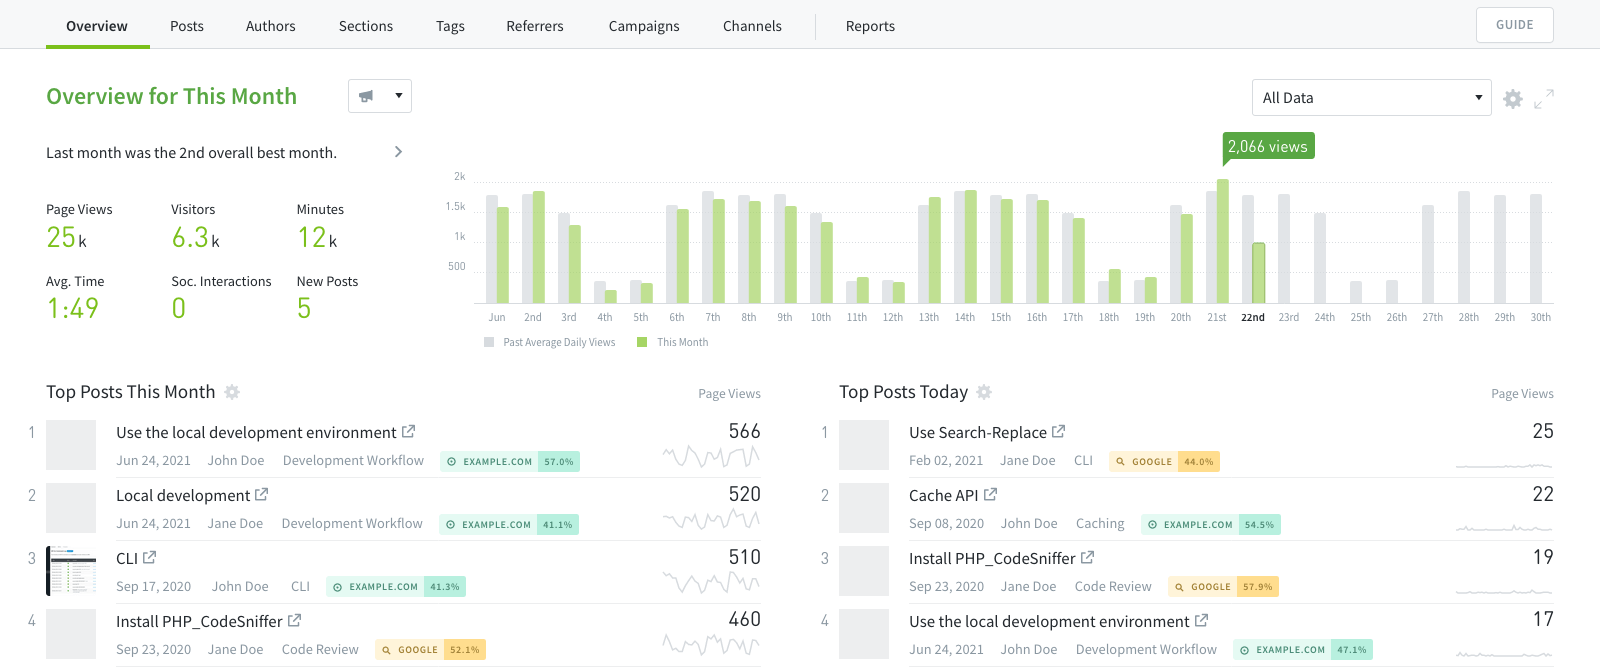 Parse.ly Dashboard Overview